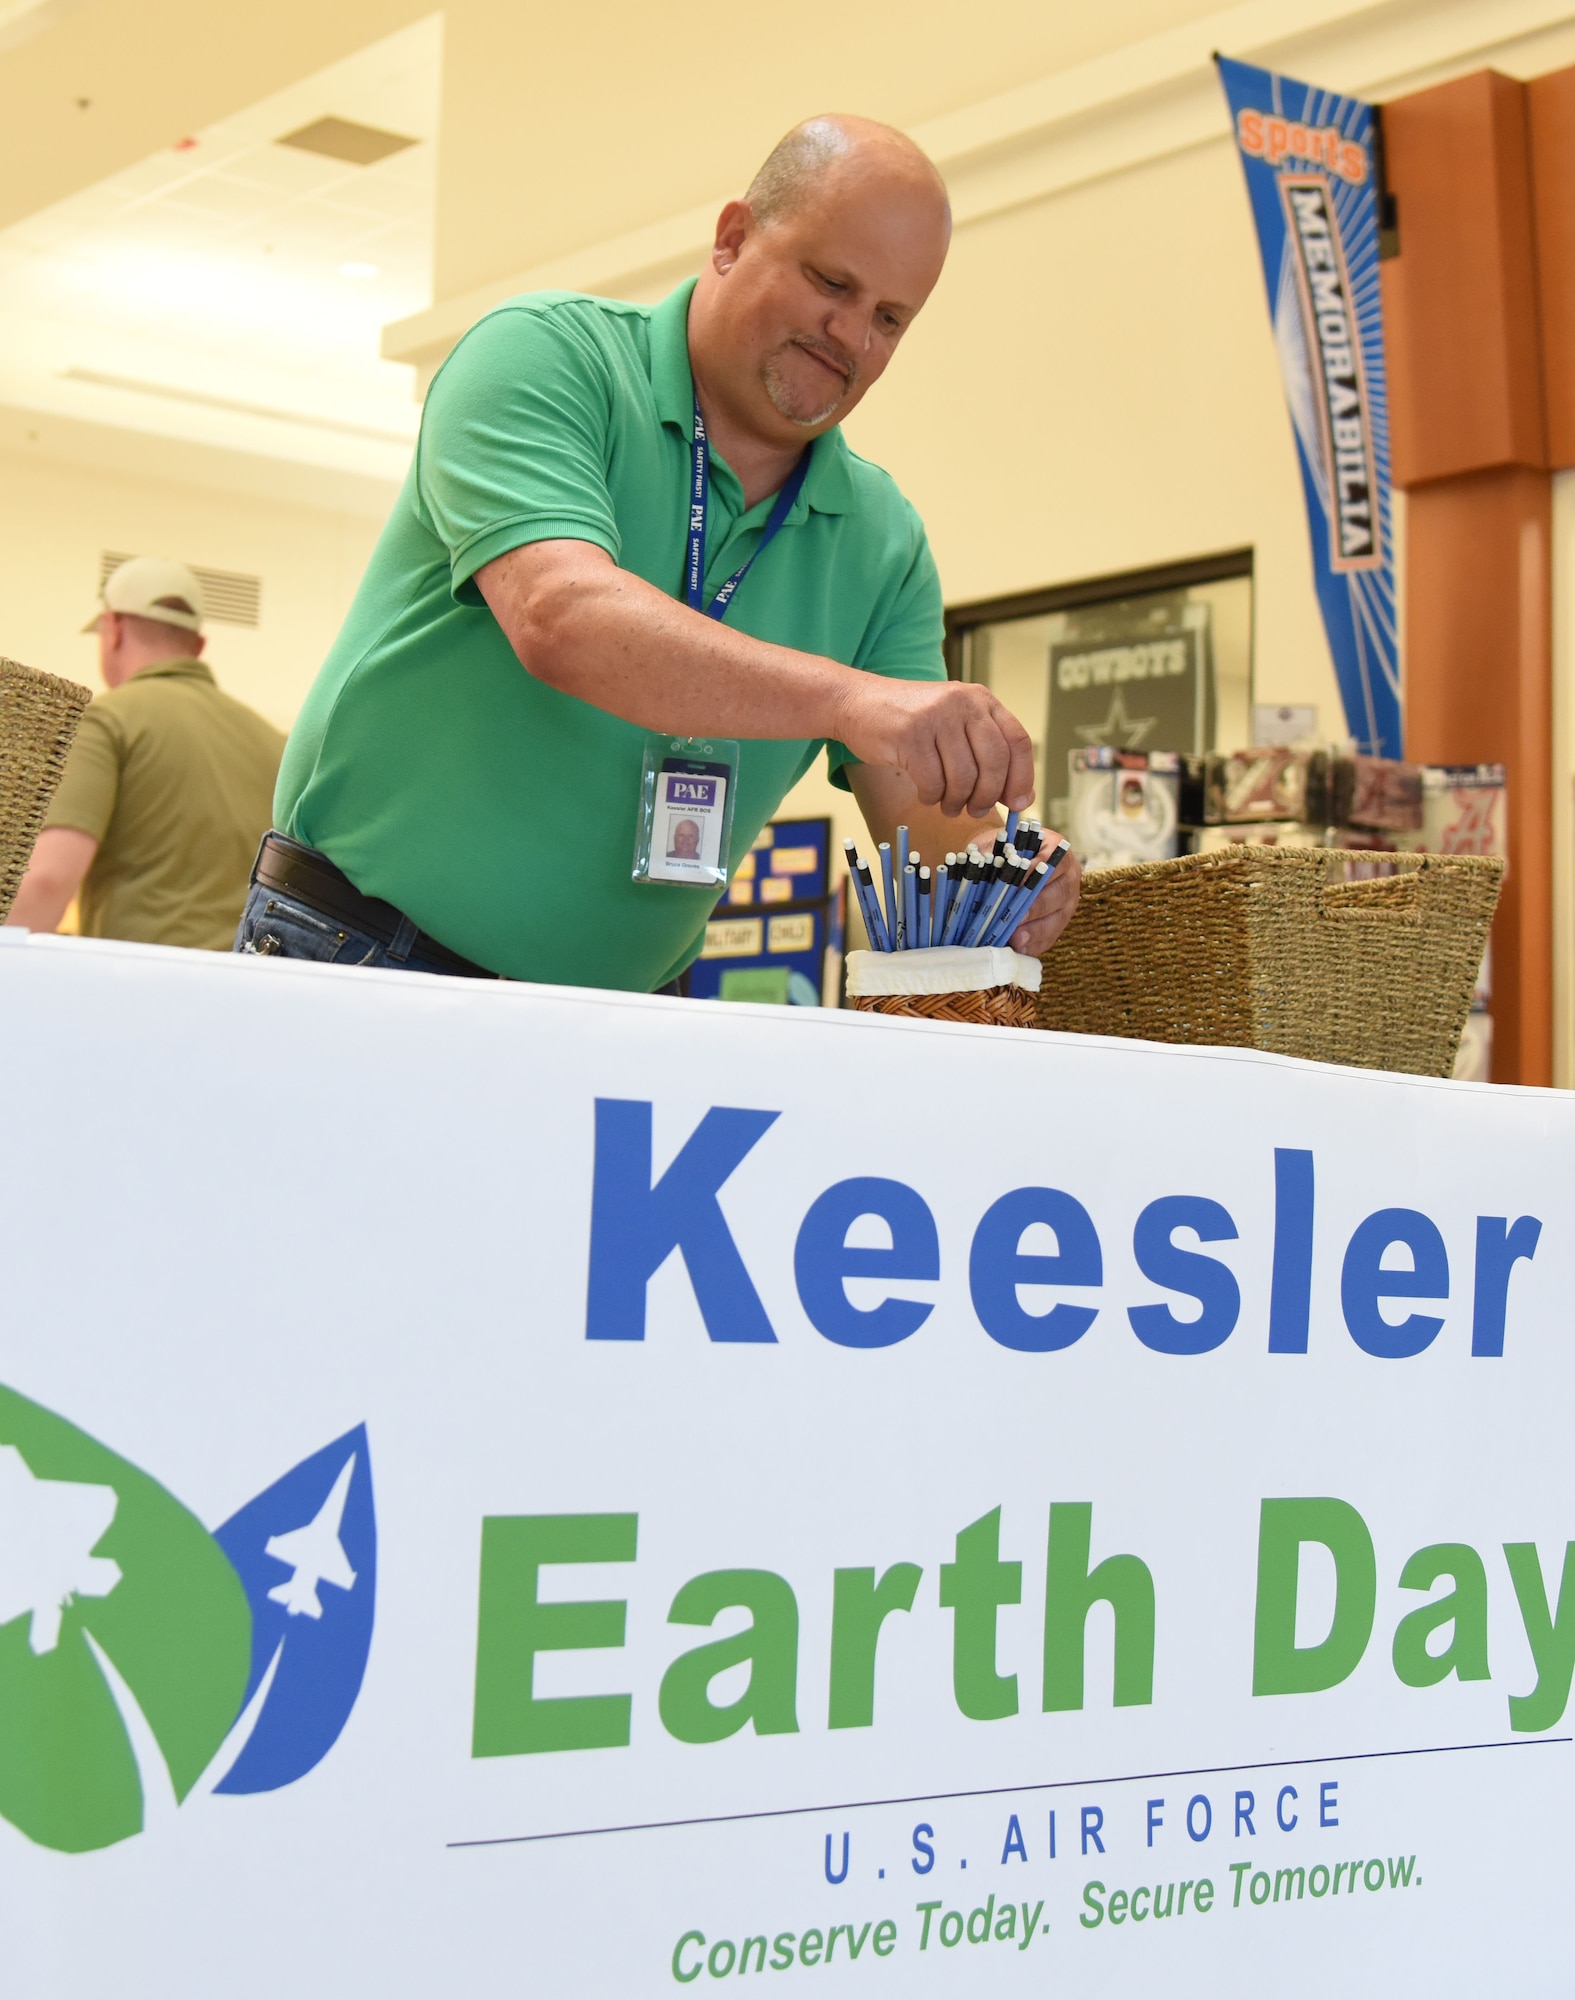 Bruce Groves, Base Operations Support energy manager, adjusts pencils made of recycled material in the base exchange April 21, 2017, on Keesler Air Force Base, Miss. The base operations support energy program and environmental office staffs set-up a booth with hand-outs and reading materials about recycling and environmental sustainability for Keesler personnel in recognition of Earth Day. (U.S. Air Force photo by Kemberly Groue)

